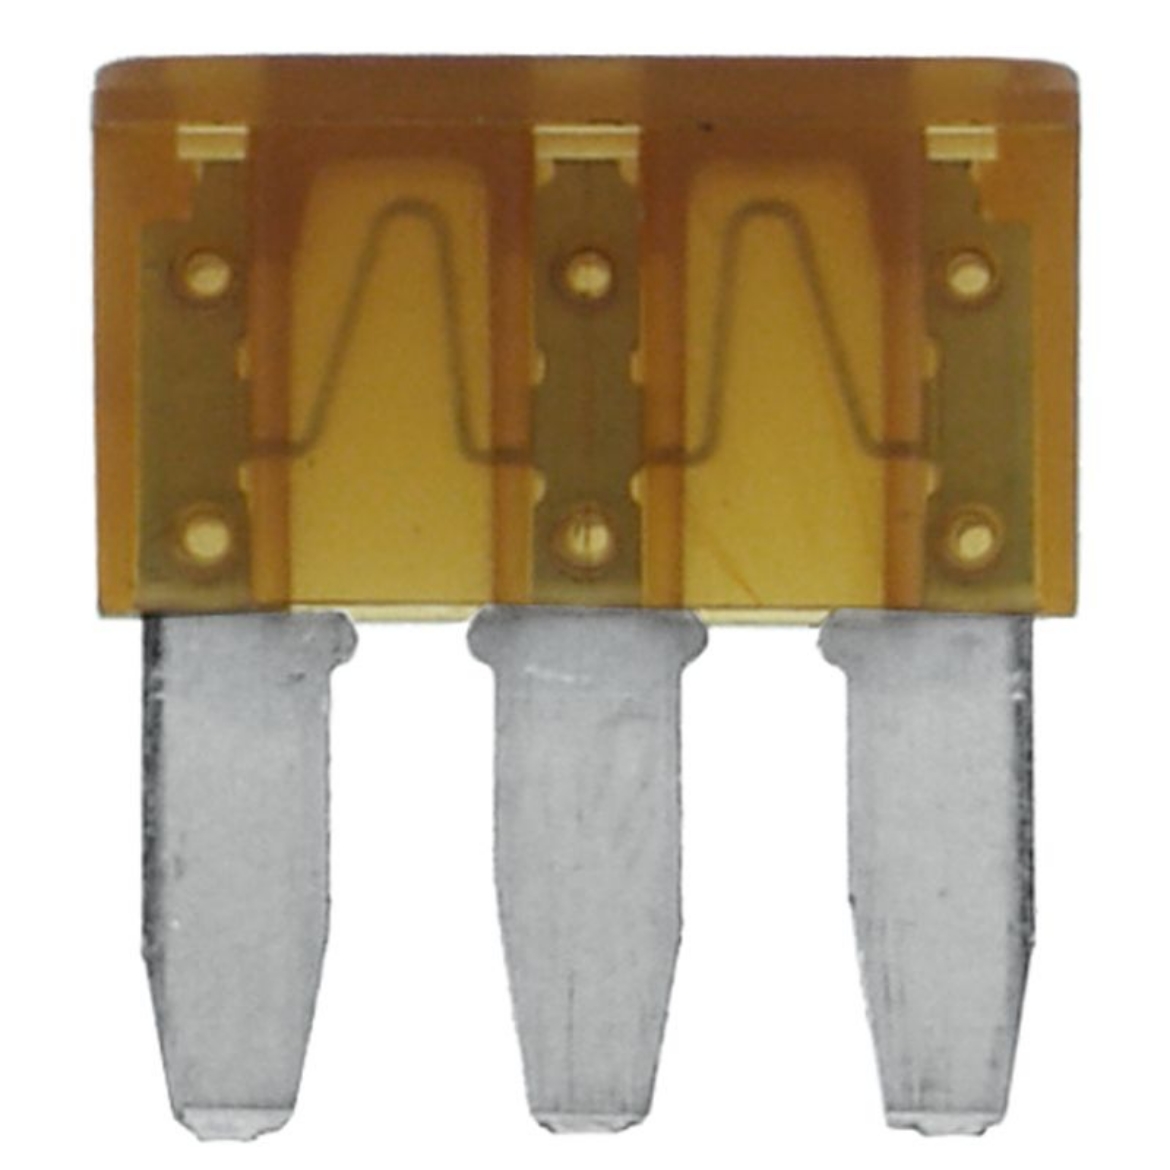 Picture of MICRO 3 BLADE FUSE 7.5 AMP